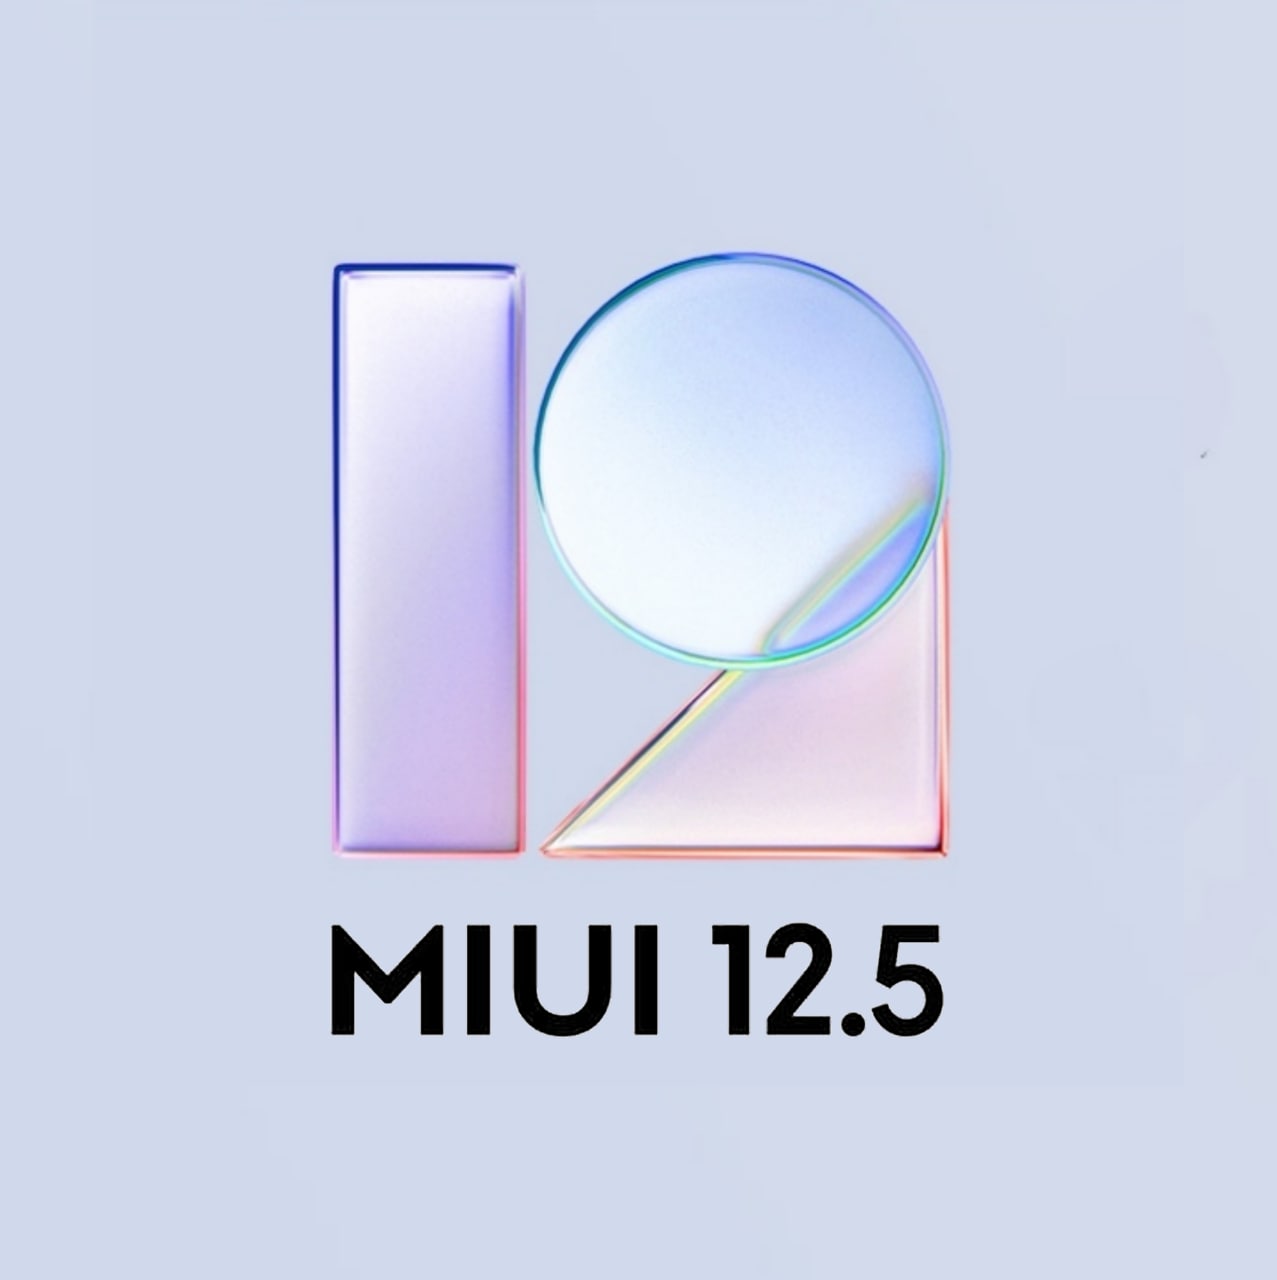 Stable MIUI 12.5 update tracker